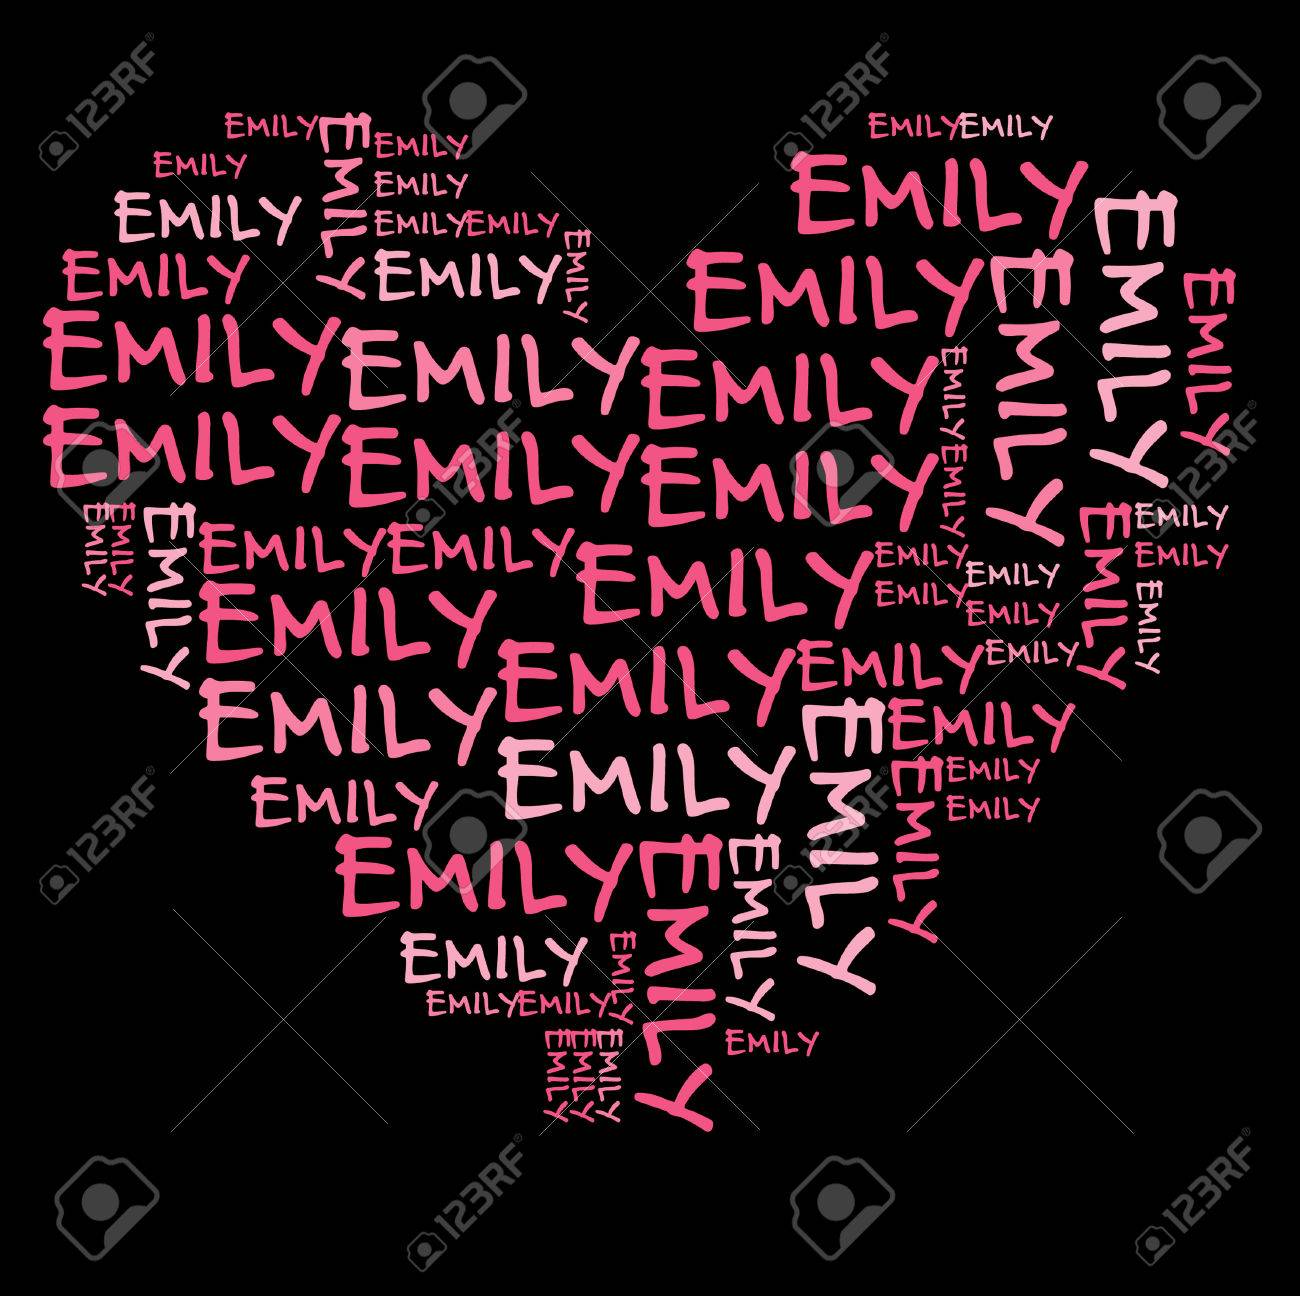 Emily Word Cloud In Pink Letters Against Black Background Stock